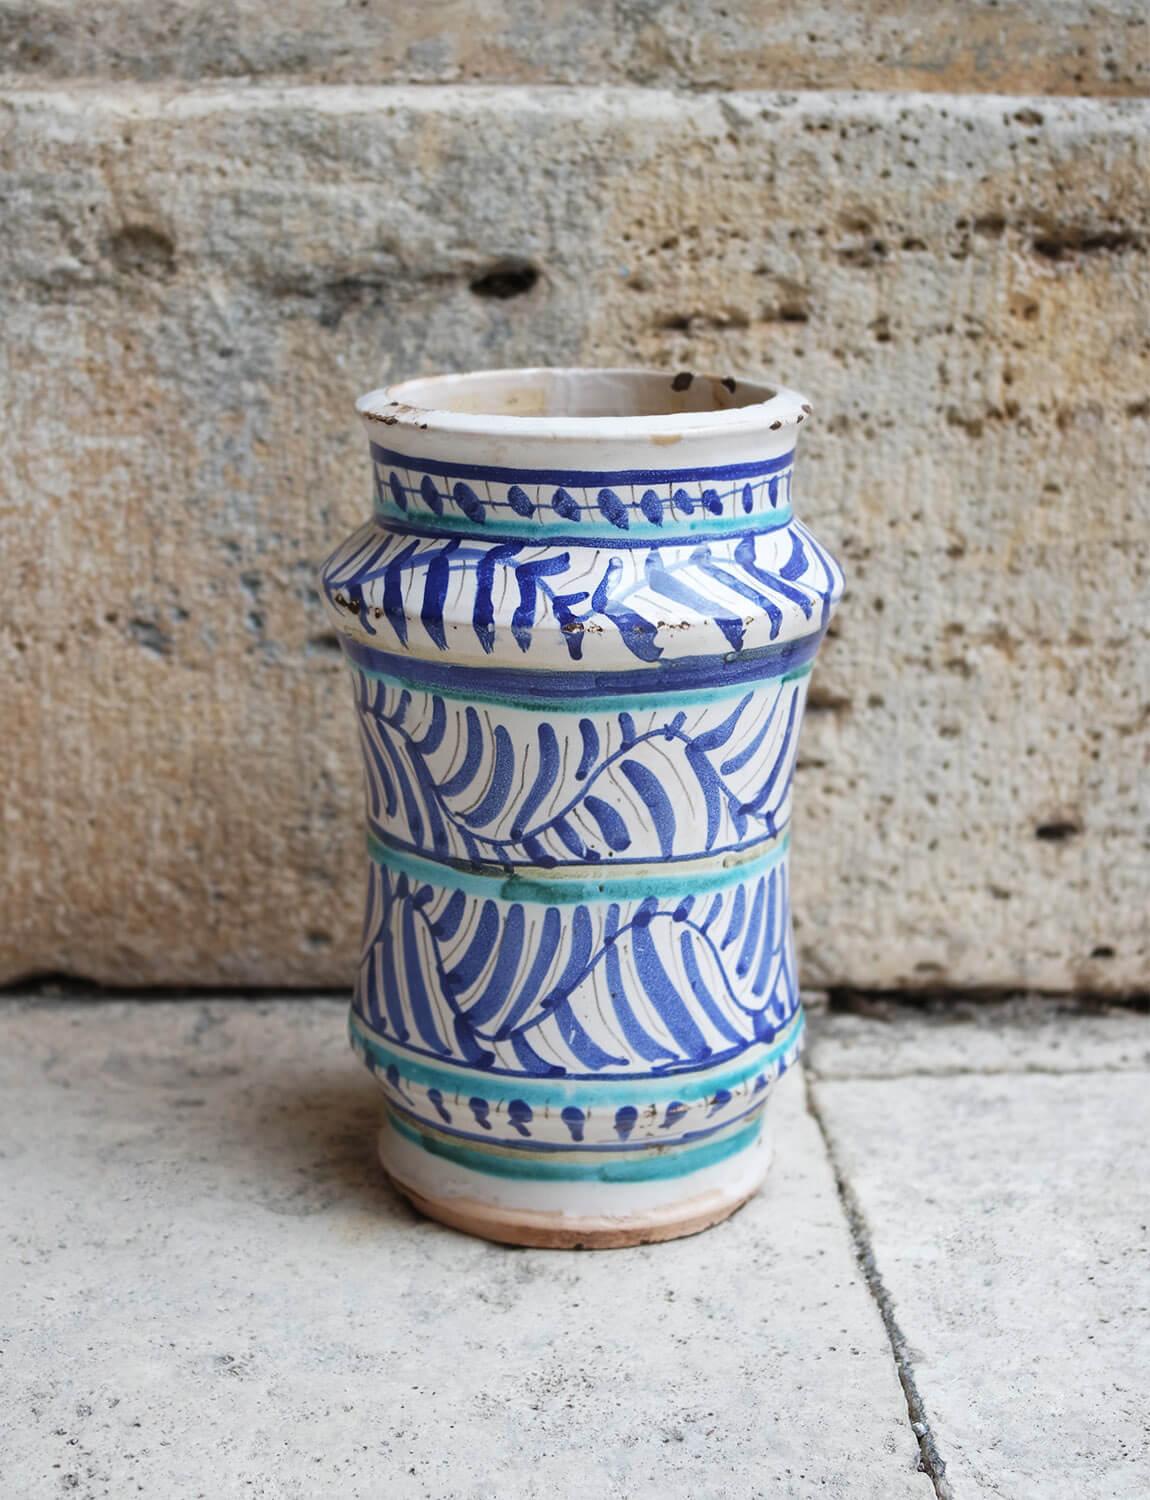 This beautiful turquoise maiolica patterned Italian albarello (late 1800s early 1900s) was found in Palazzo Torlogna in Rome. Albarelli were ancient storage containers often used in old pharmacies and shops. Their unique shape was designed to fit